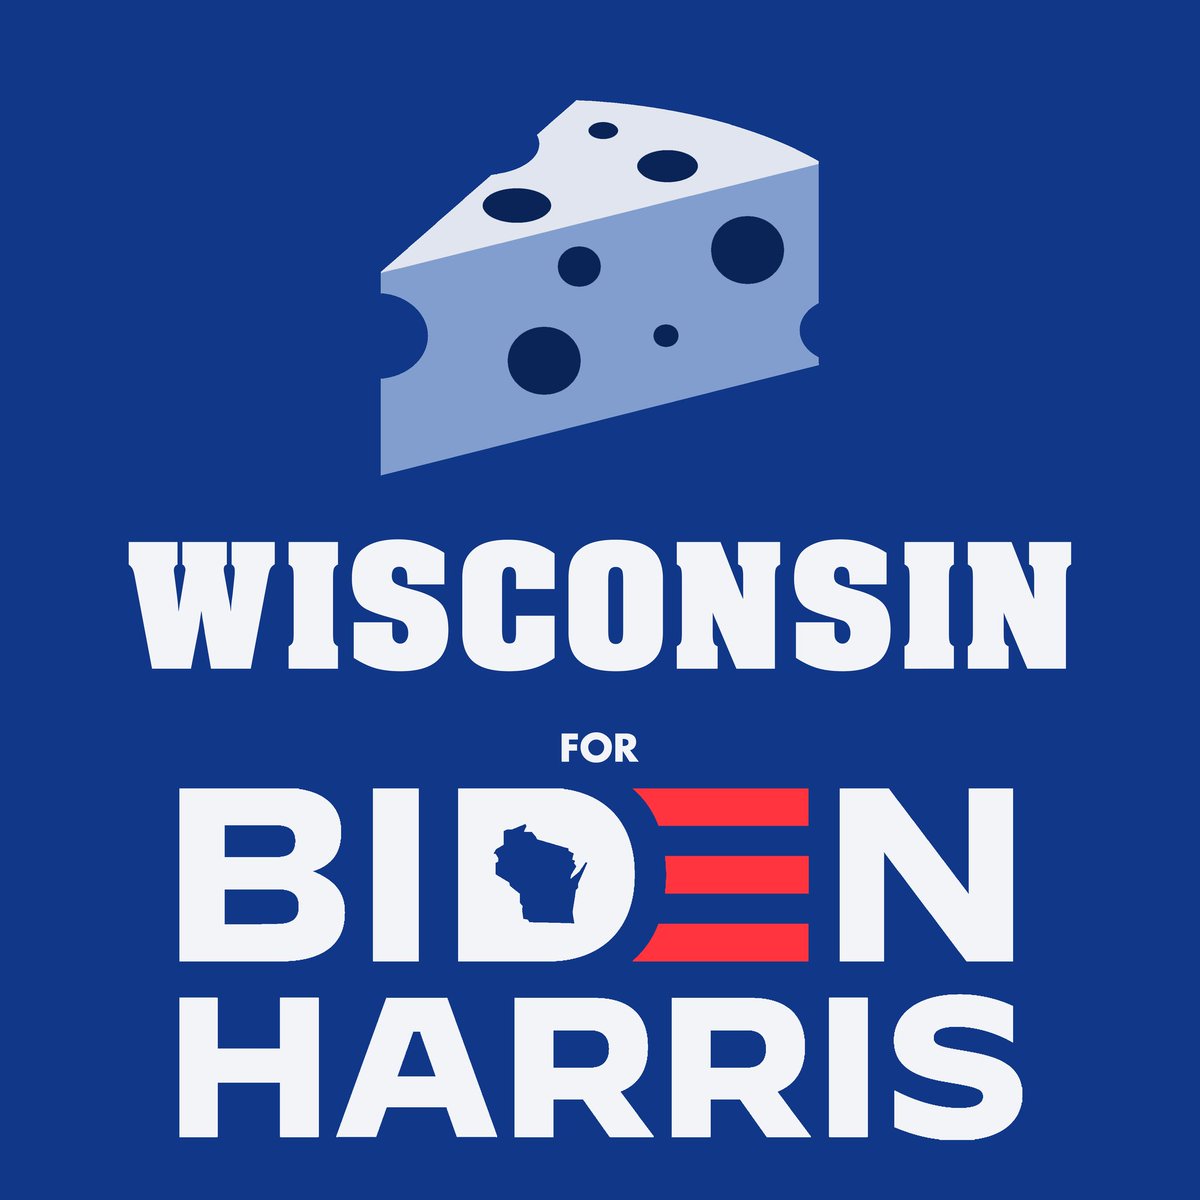 ICYMI my husband  @viva_verde is incredibly talented and made these beautiful state coalition graphics for  #BidenHarris supporters. More otw and he takes requests for priority! RT your state if you're  #RidinWithBidenHarris 8/8  #Vermont  #Virginia  #Washington  #Wisconsin